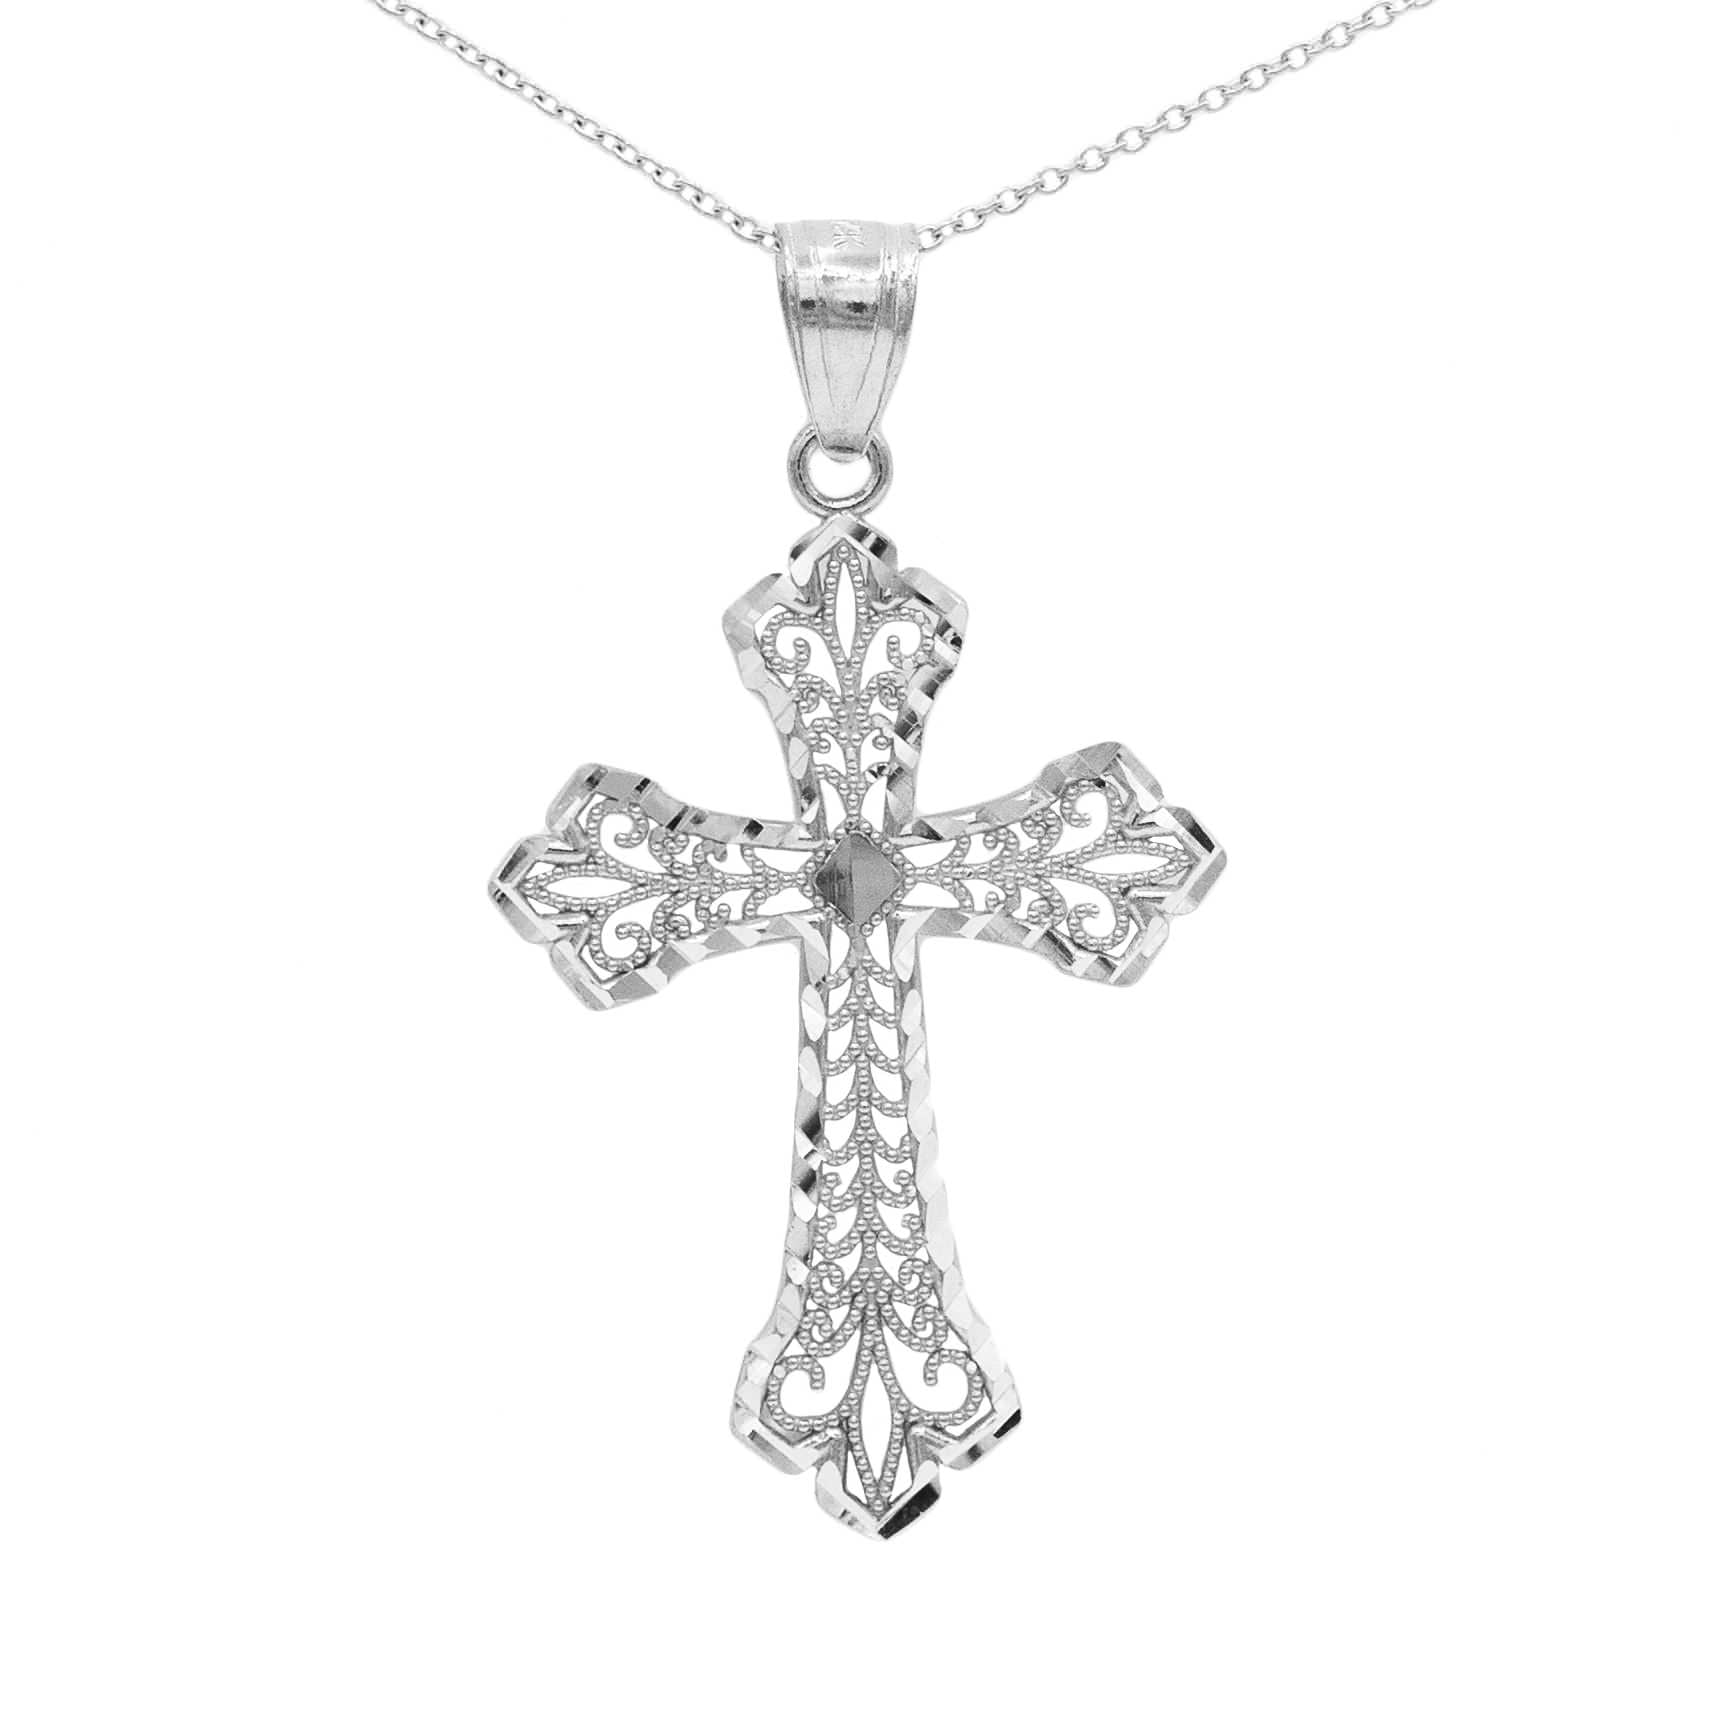 18 925 Sterling Silver Oval CZ Cross Religious Pendant Necklace 